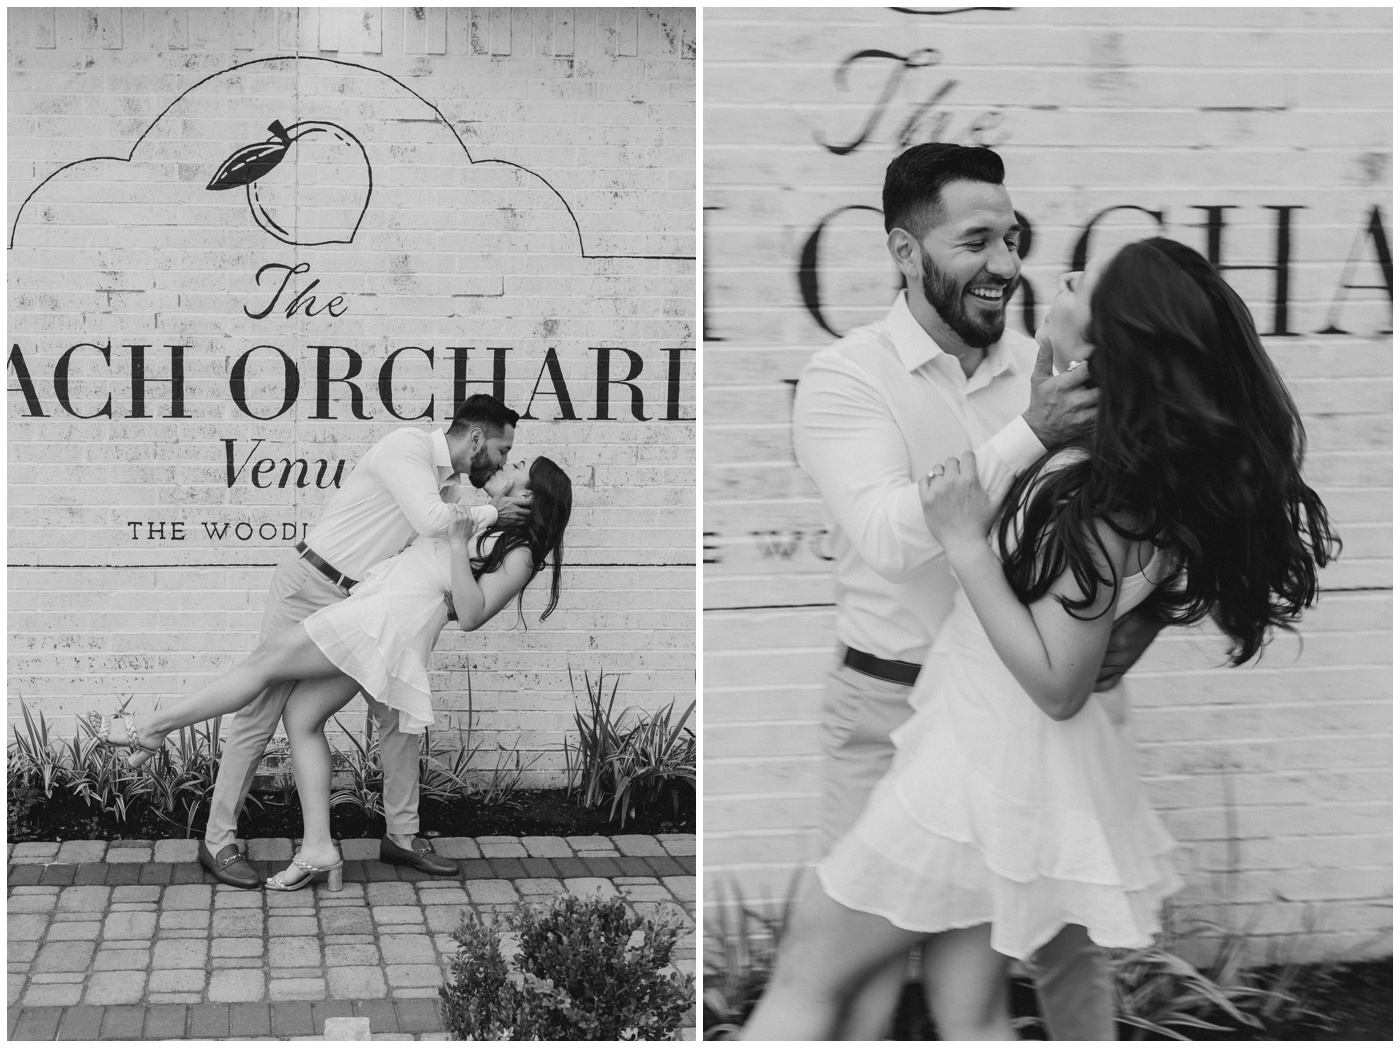 Houston Wedding Photographer | A couple laughs together at the Peach Orchard Venue.